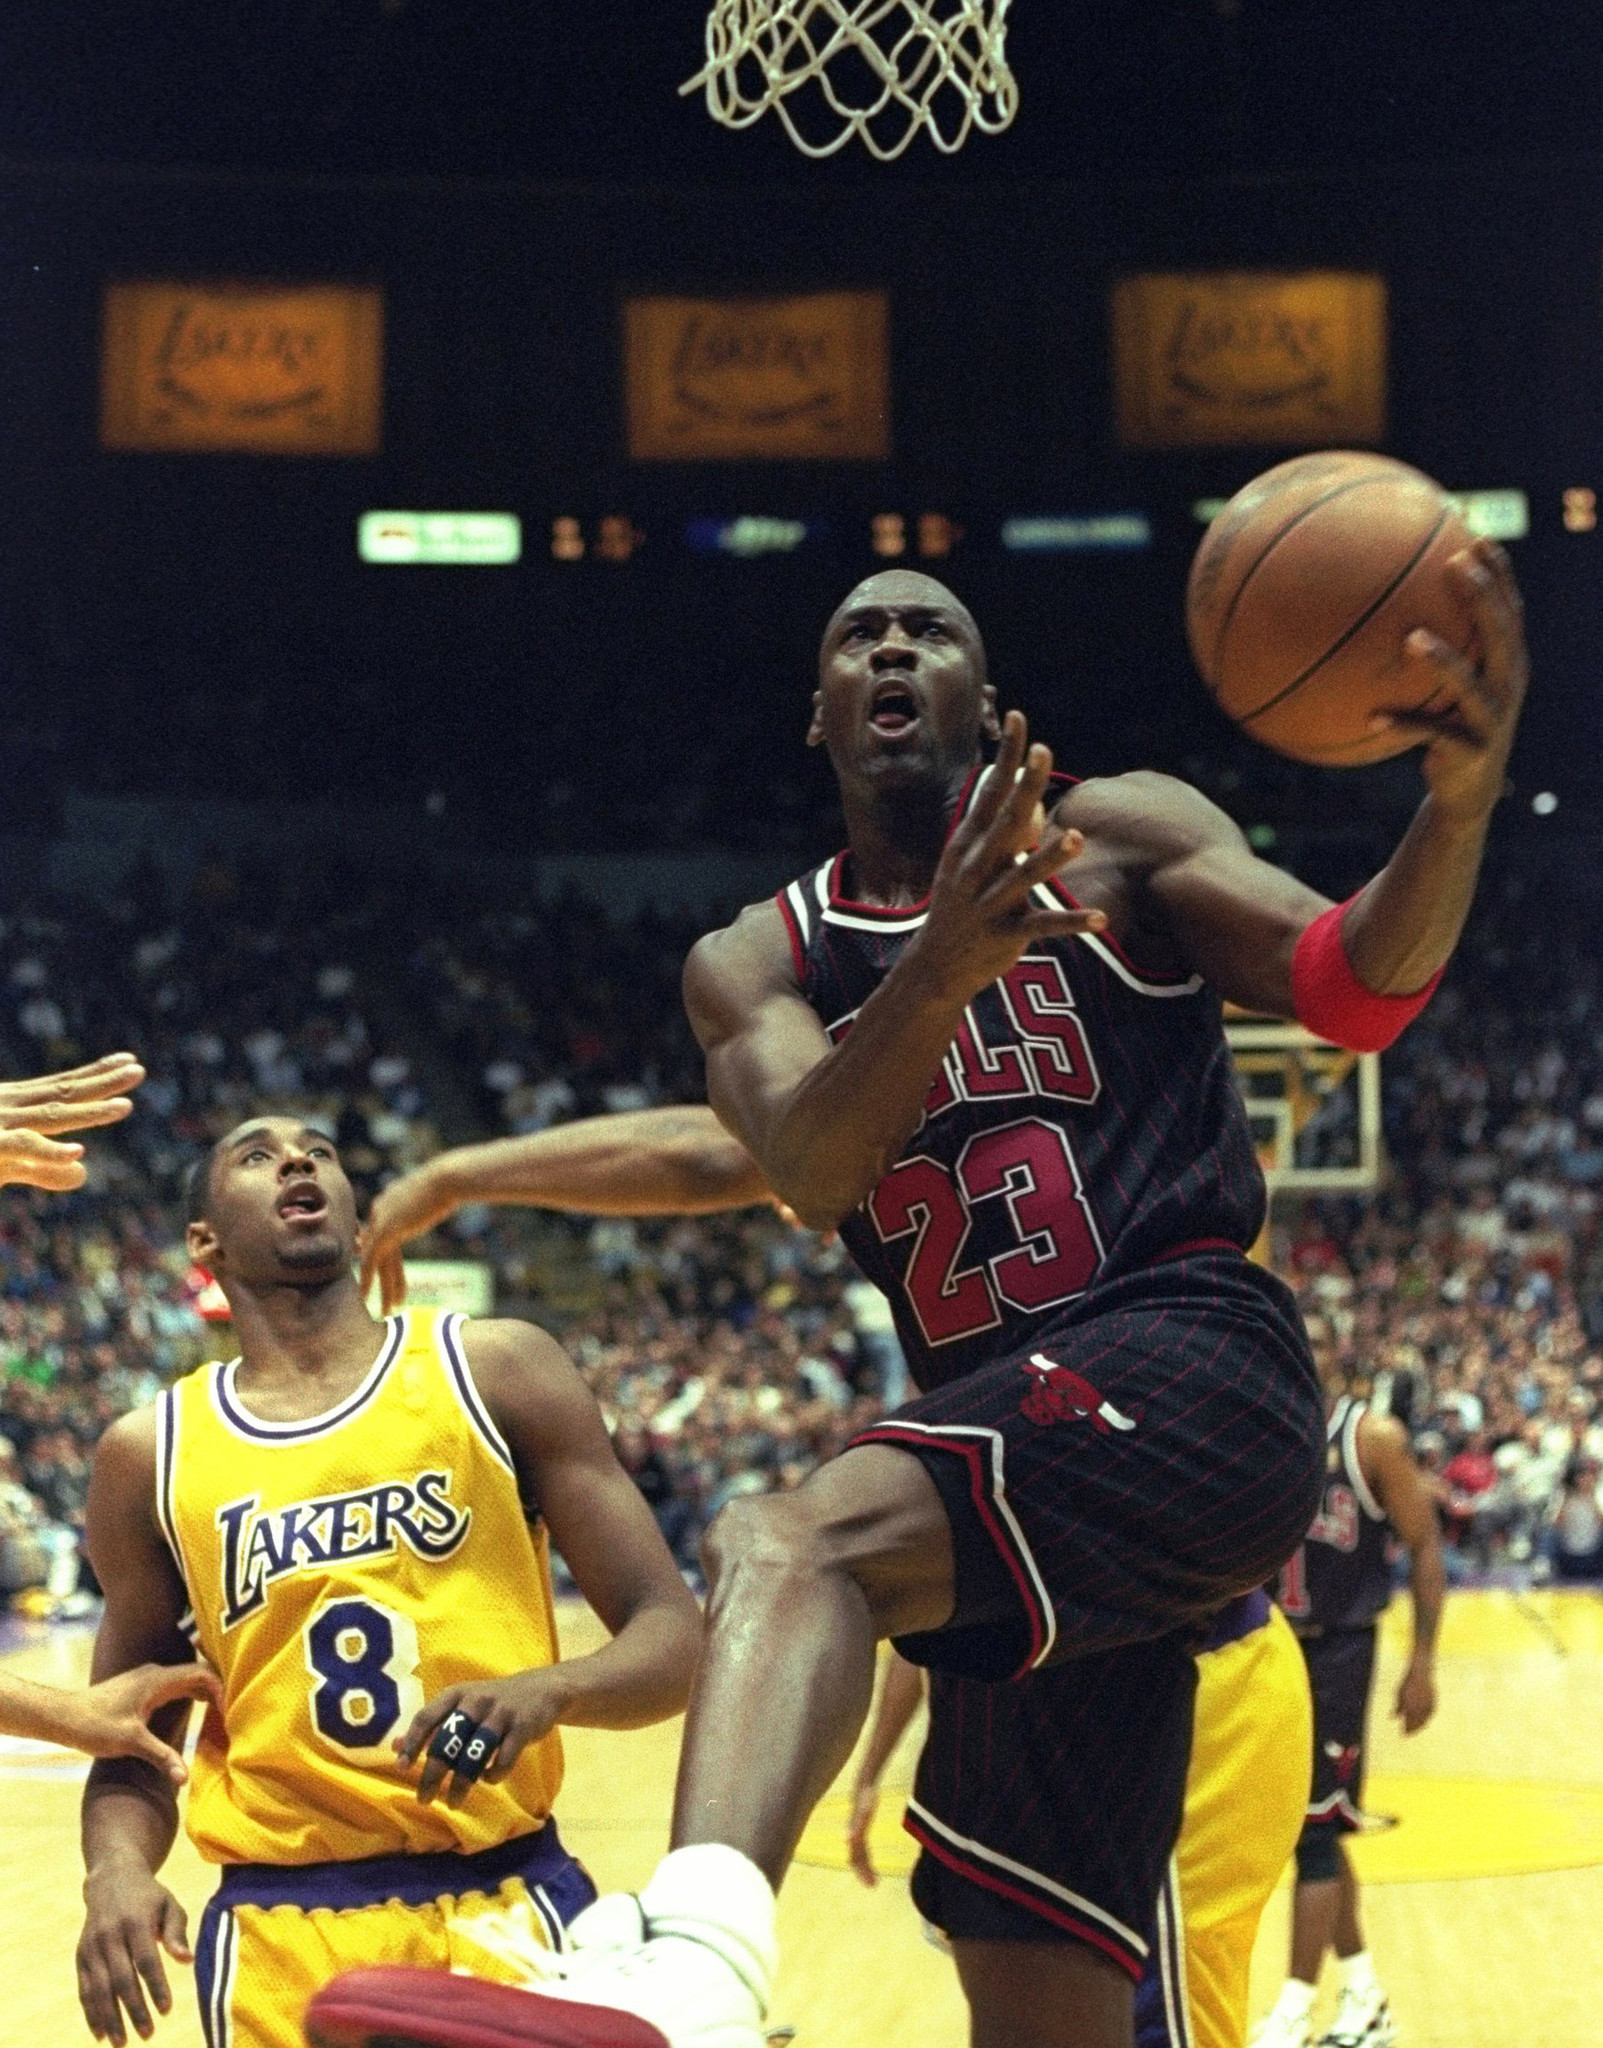 10 times '53' mattered to Michael Jordan, who turns 53 today – Sun Sentinel